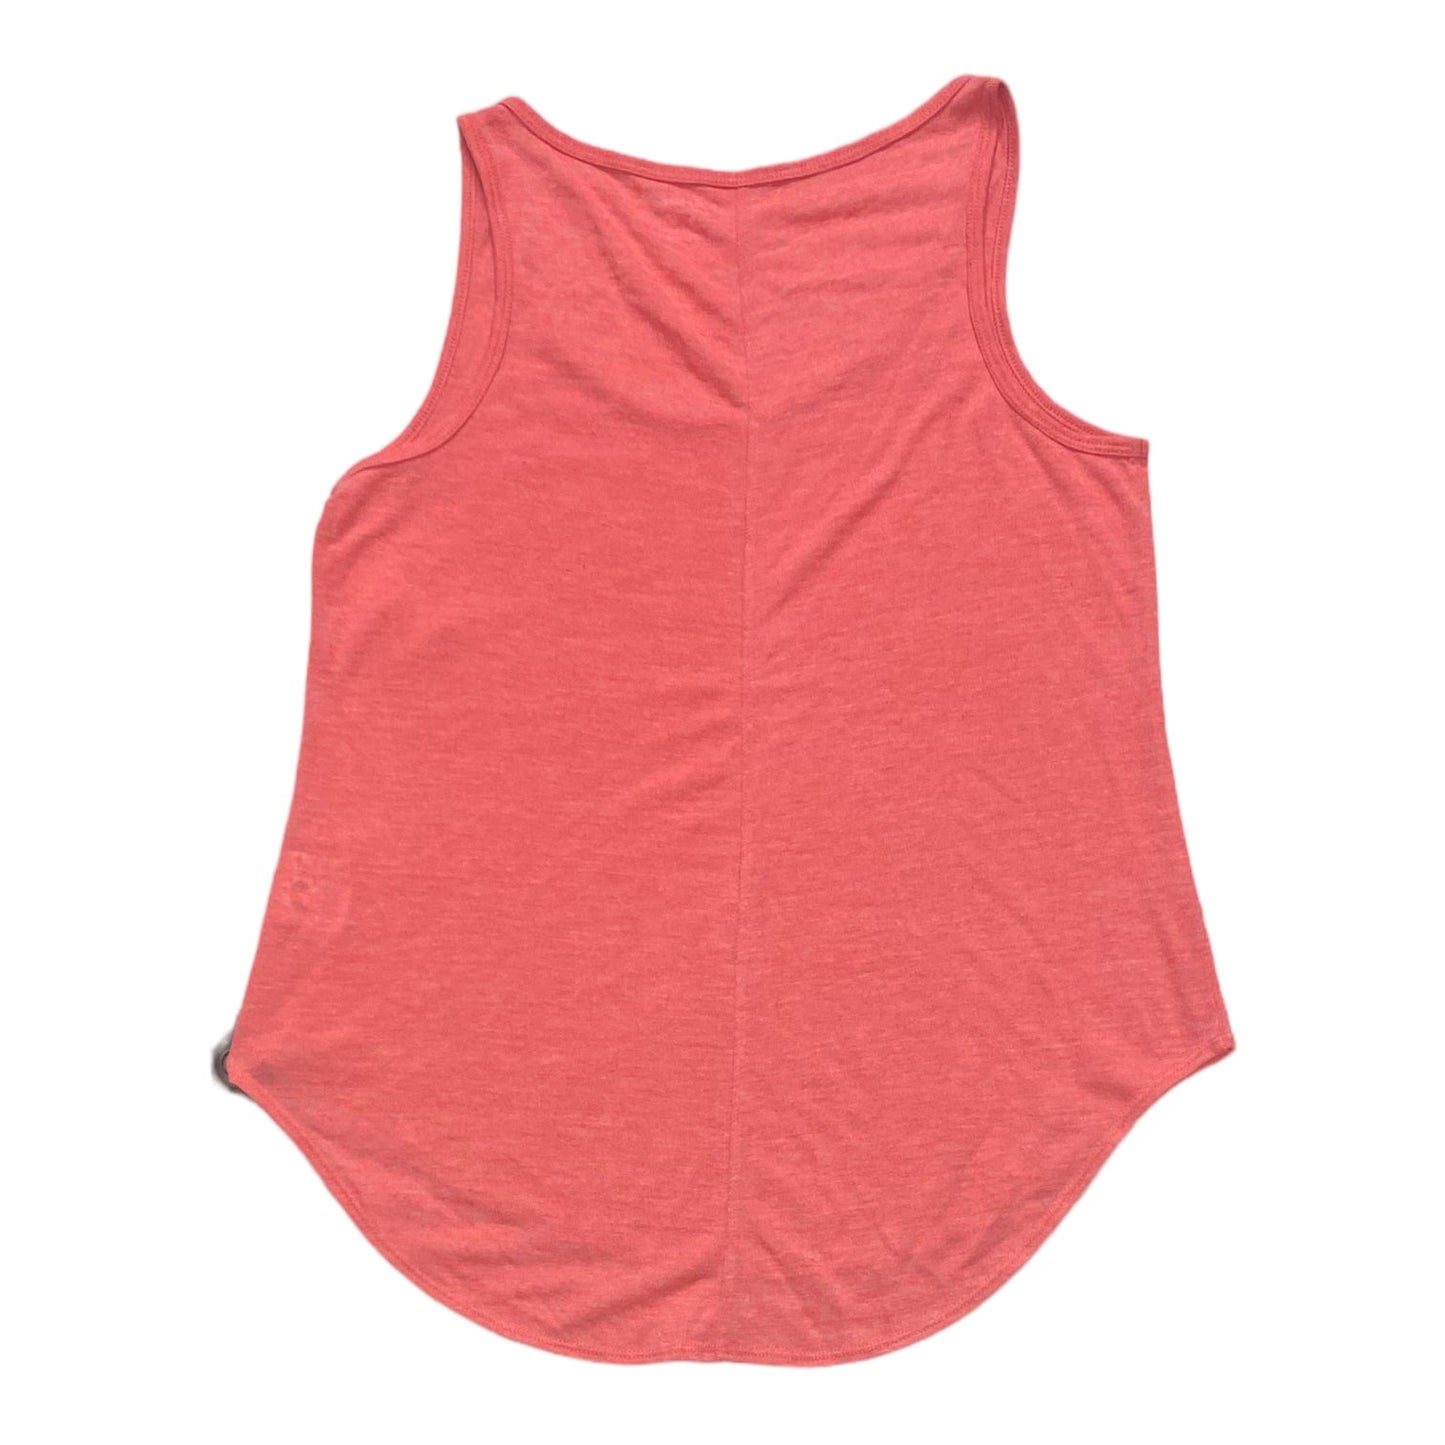 Pink Top Sleeveless Old Navy, Size M